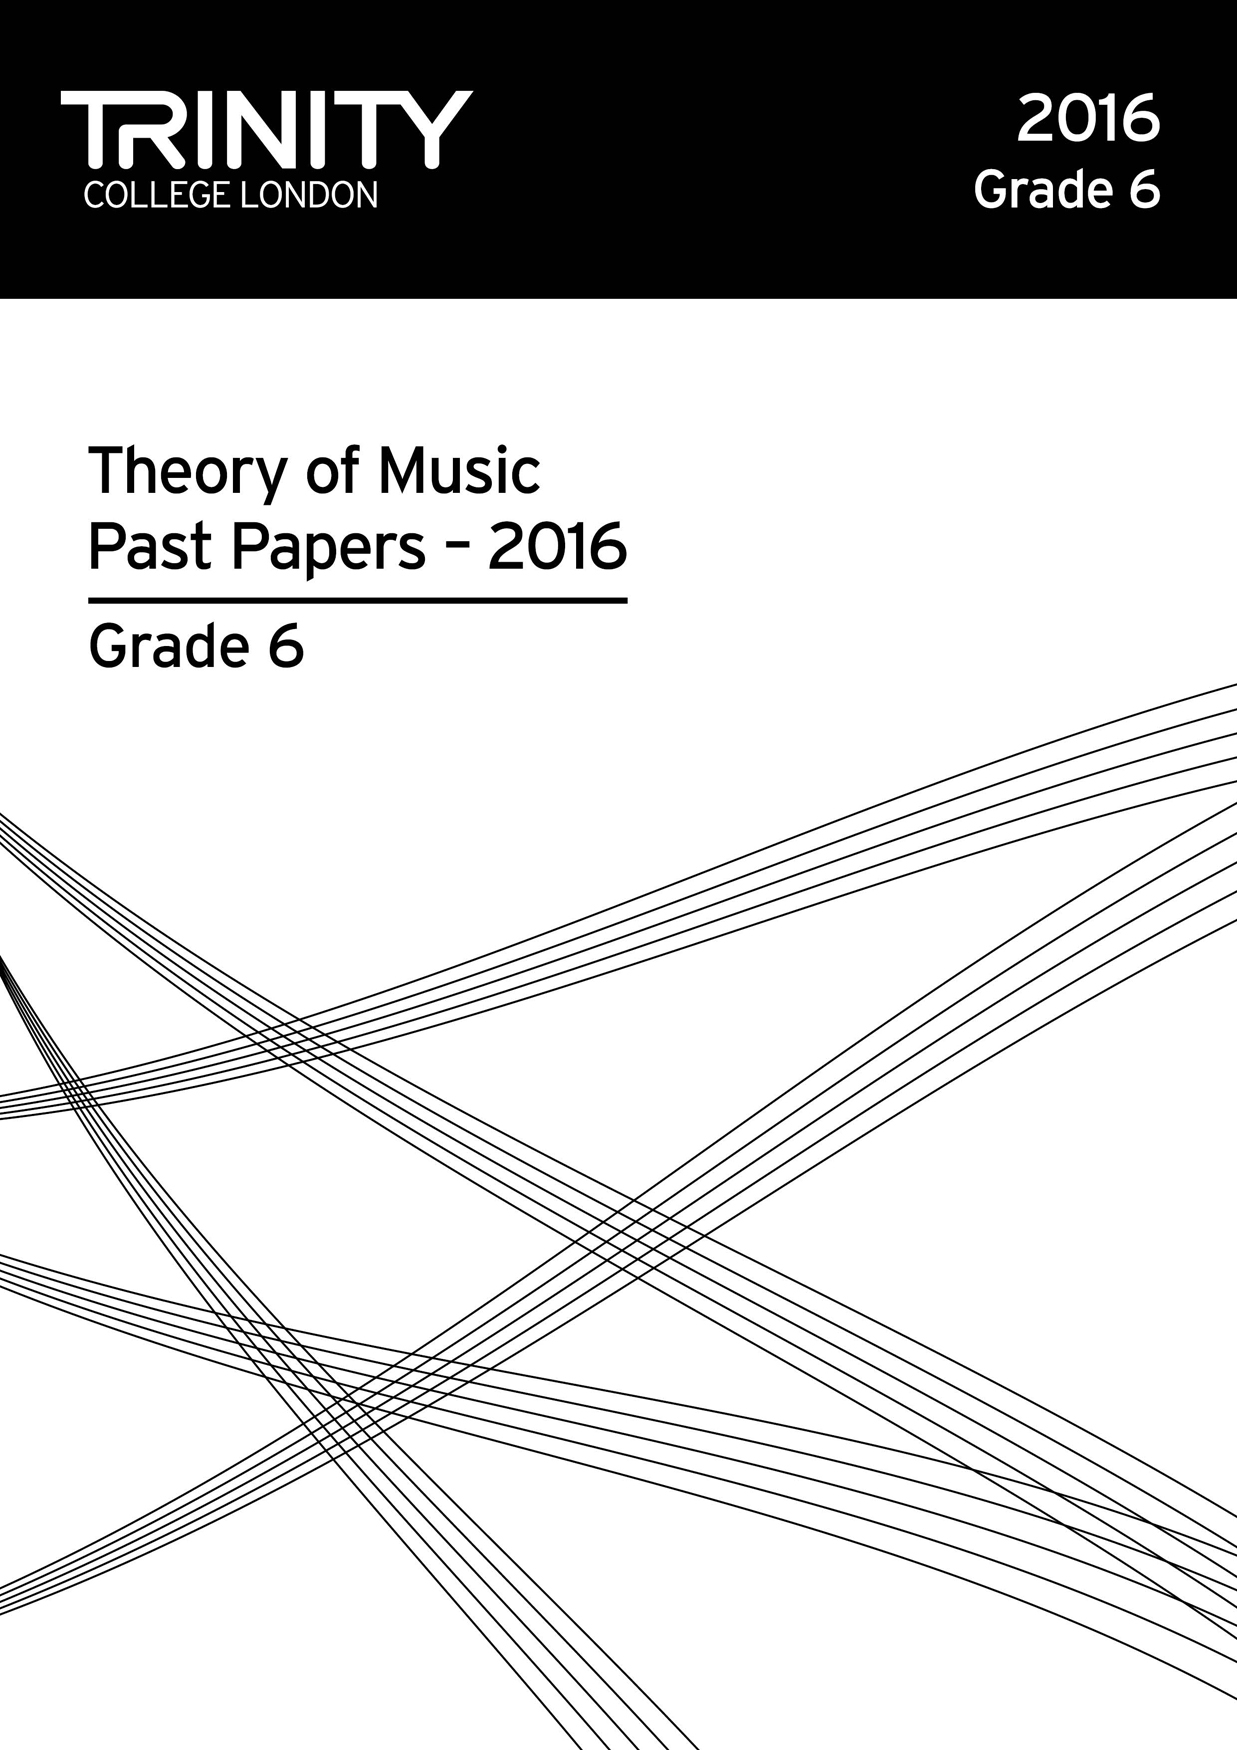 Trinity College London Theory of Music Past Paper 2016 - Grade 6 [Trinity Theory Past Papers]